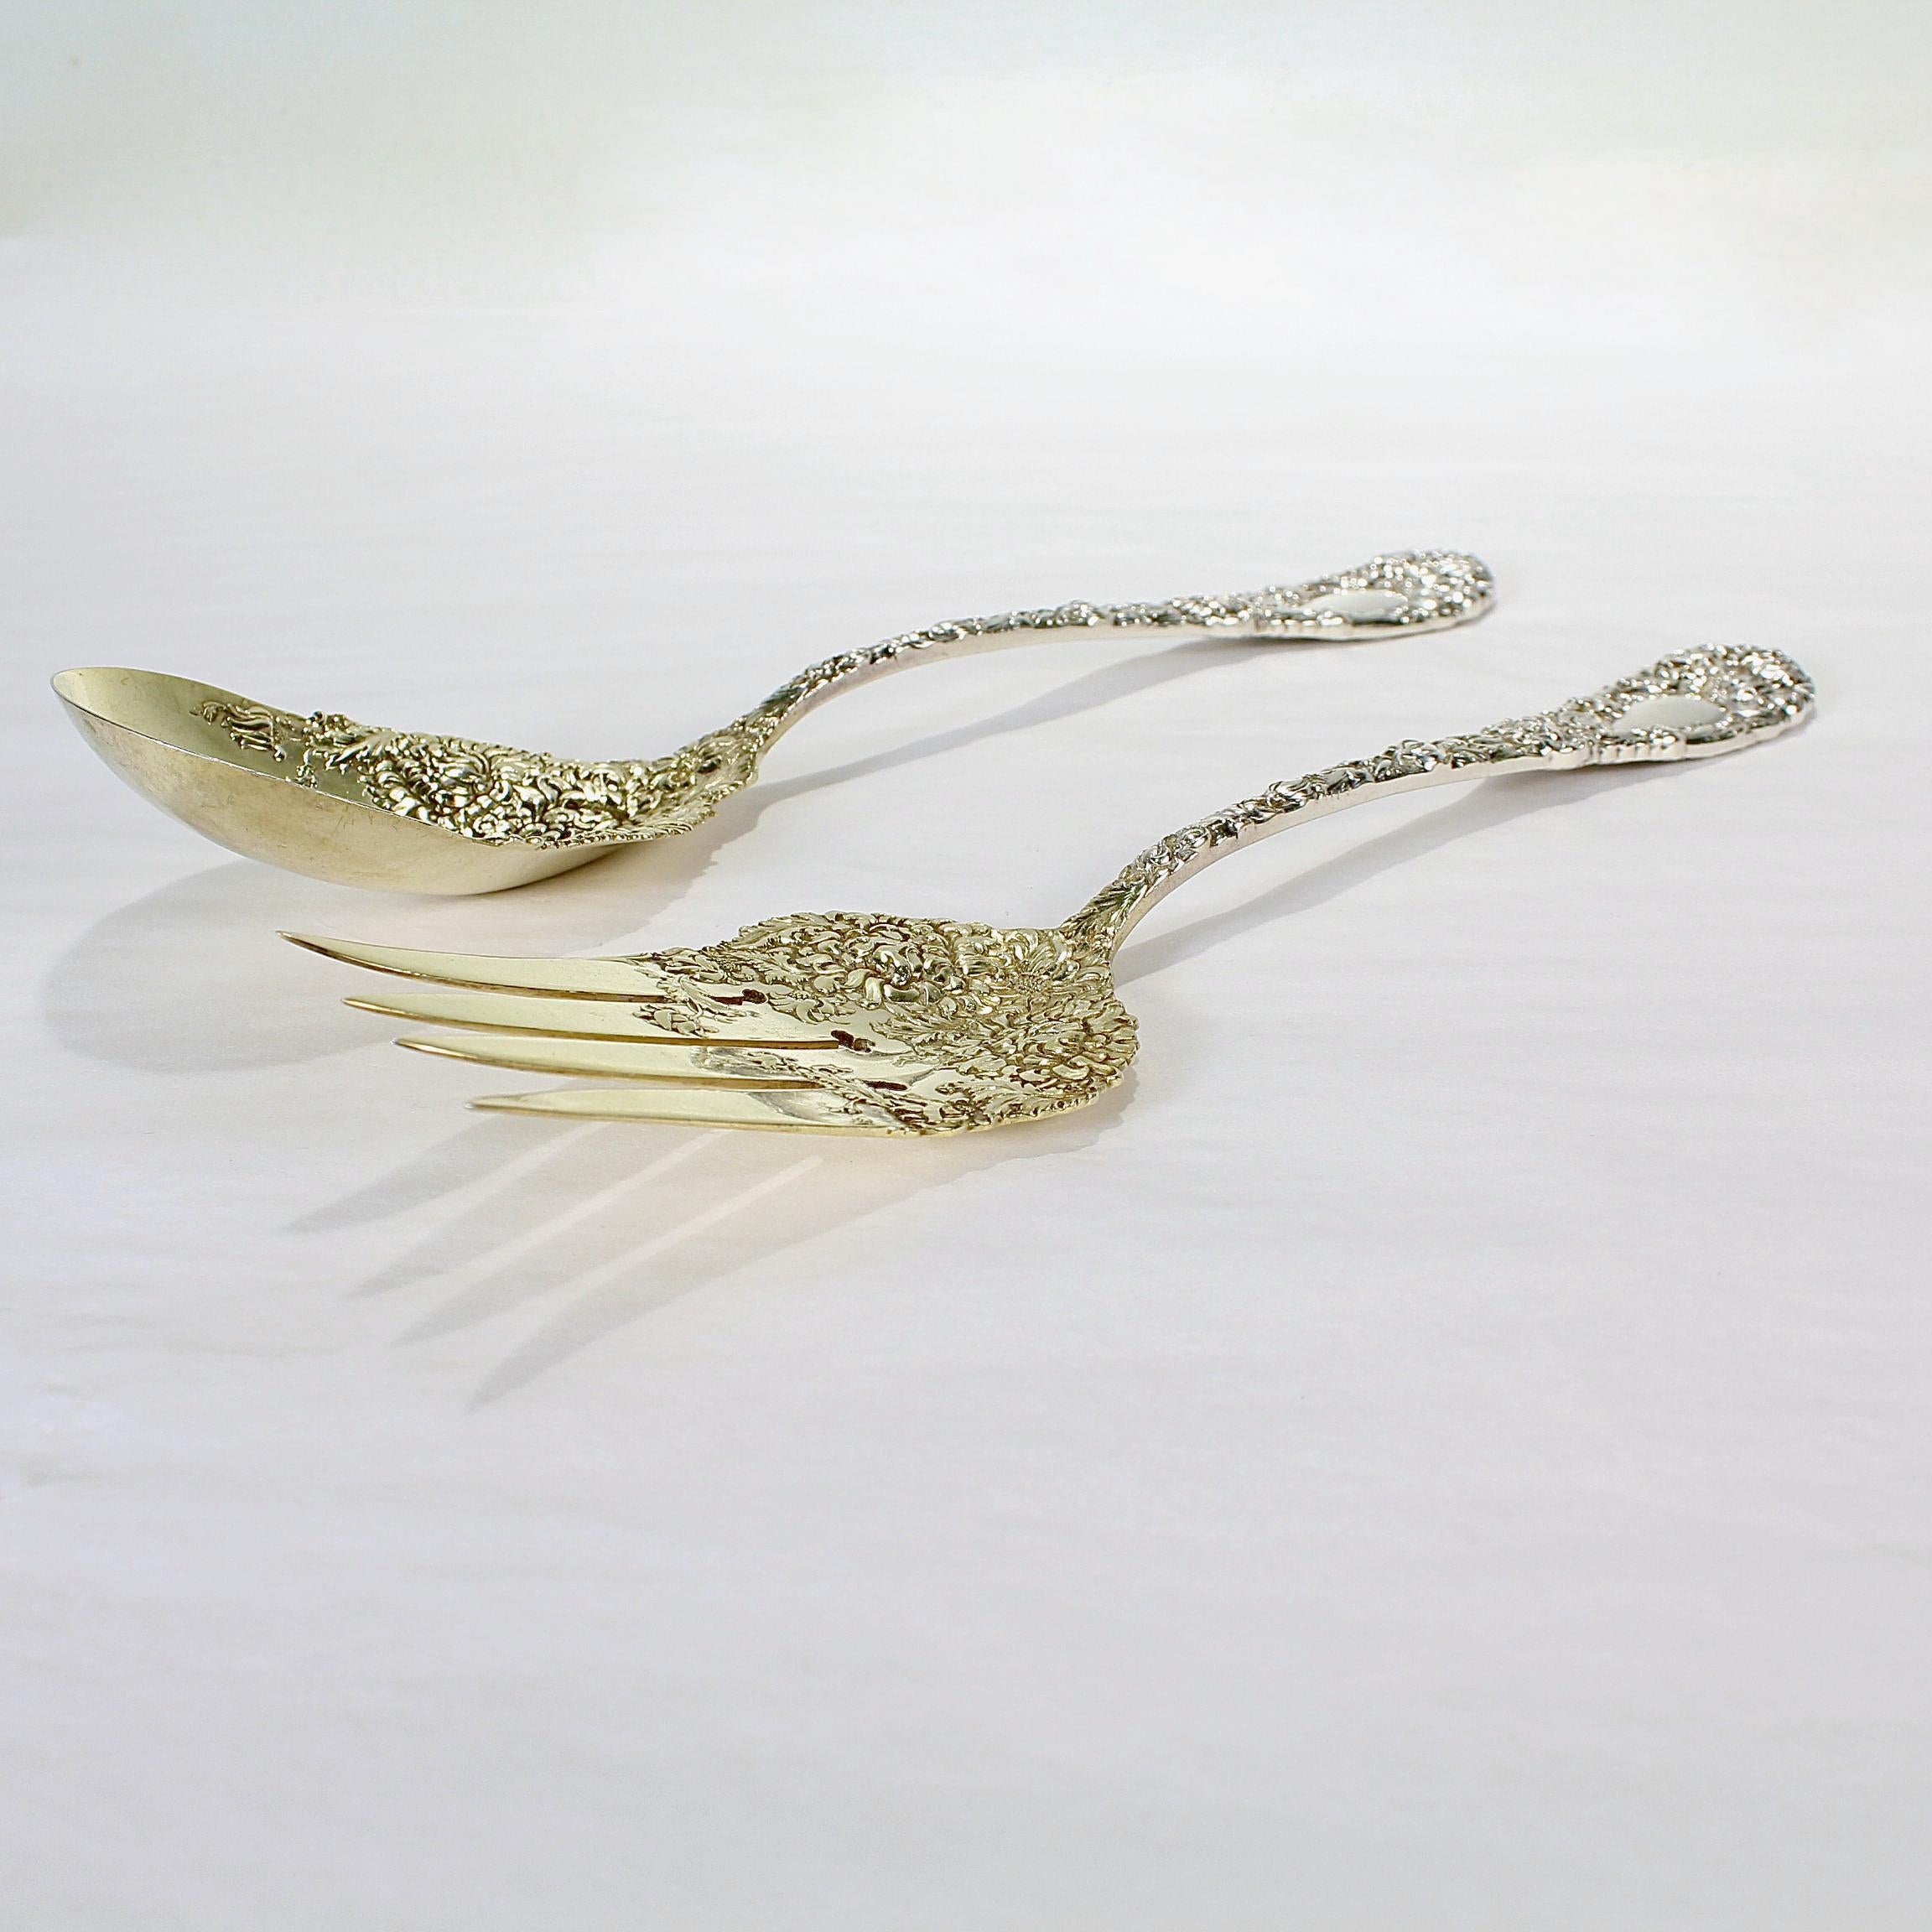 A fine pair of sterling silver salad servers.

By Durgin (and also bearing marks for Black, Starr & Frost).

In sterling silver. 

With a gold wash to both the spoon bowl and fork tines.

Simply a great pair of Chrysanthemum salad servers! 